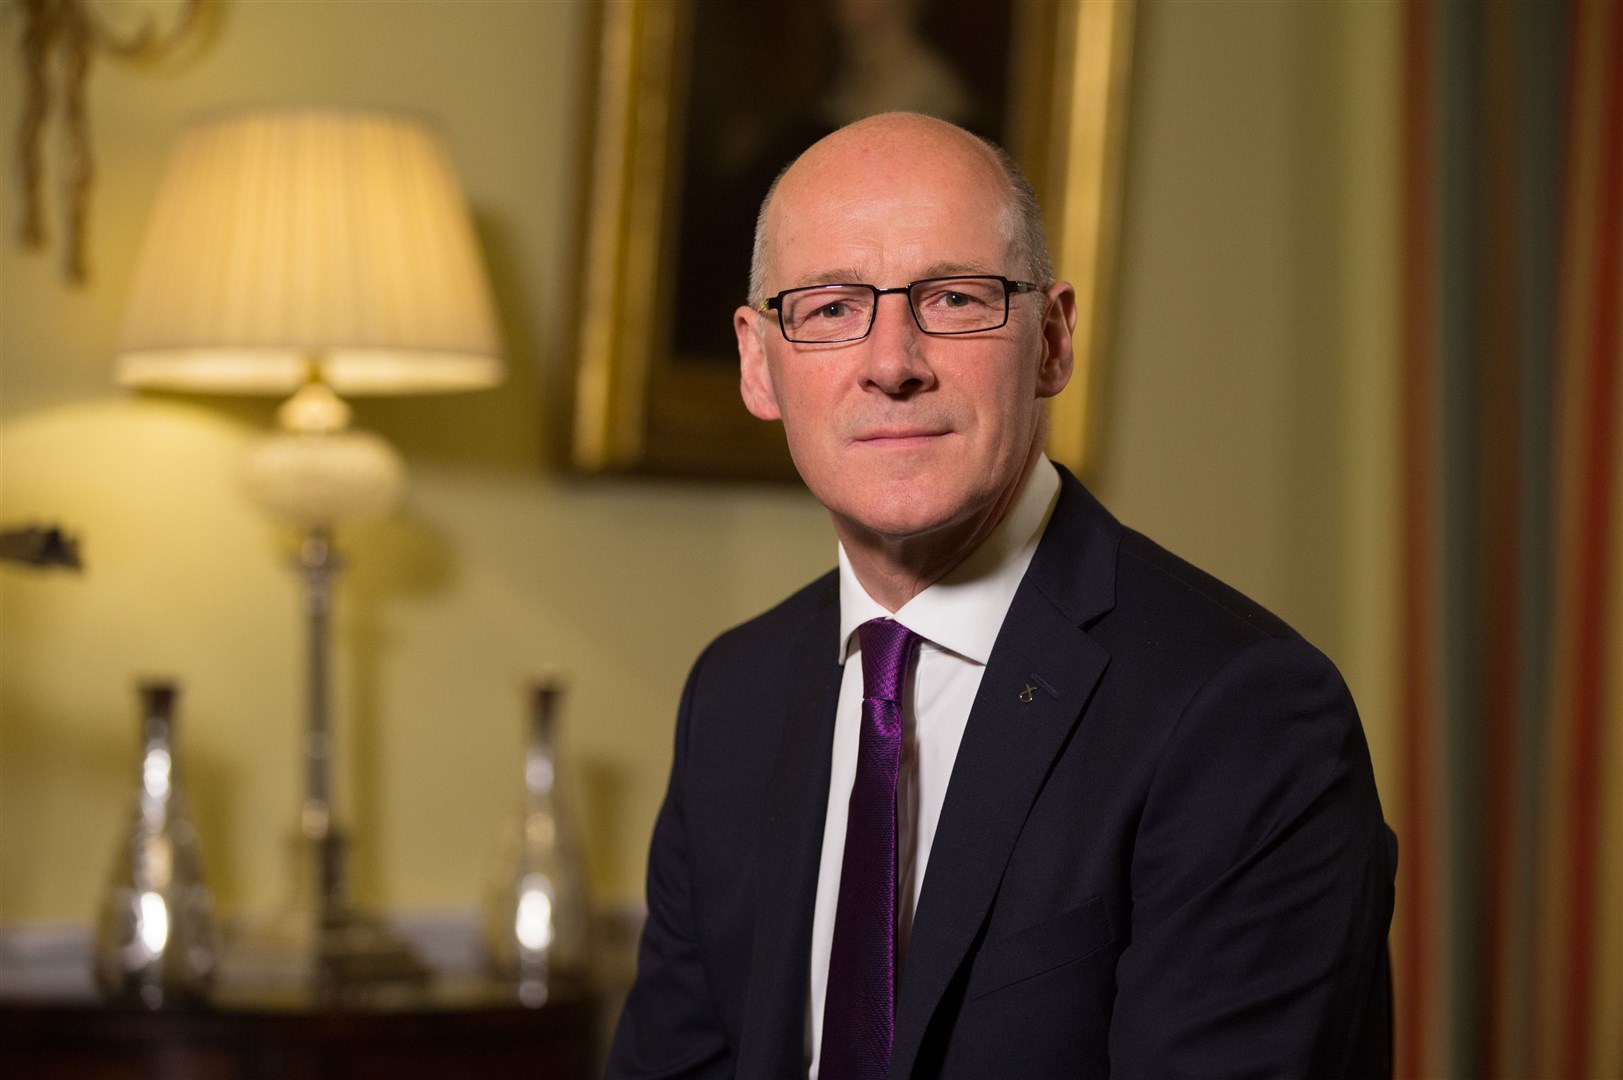 John Swinney has been elected as the new leader of the SNP.